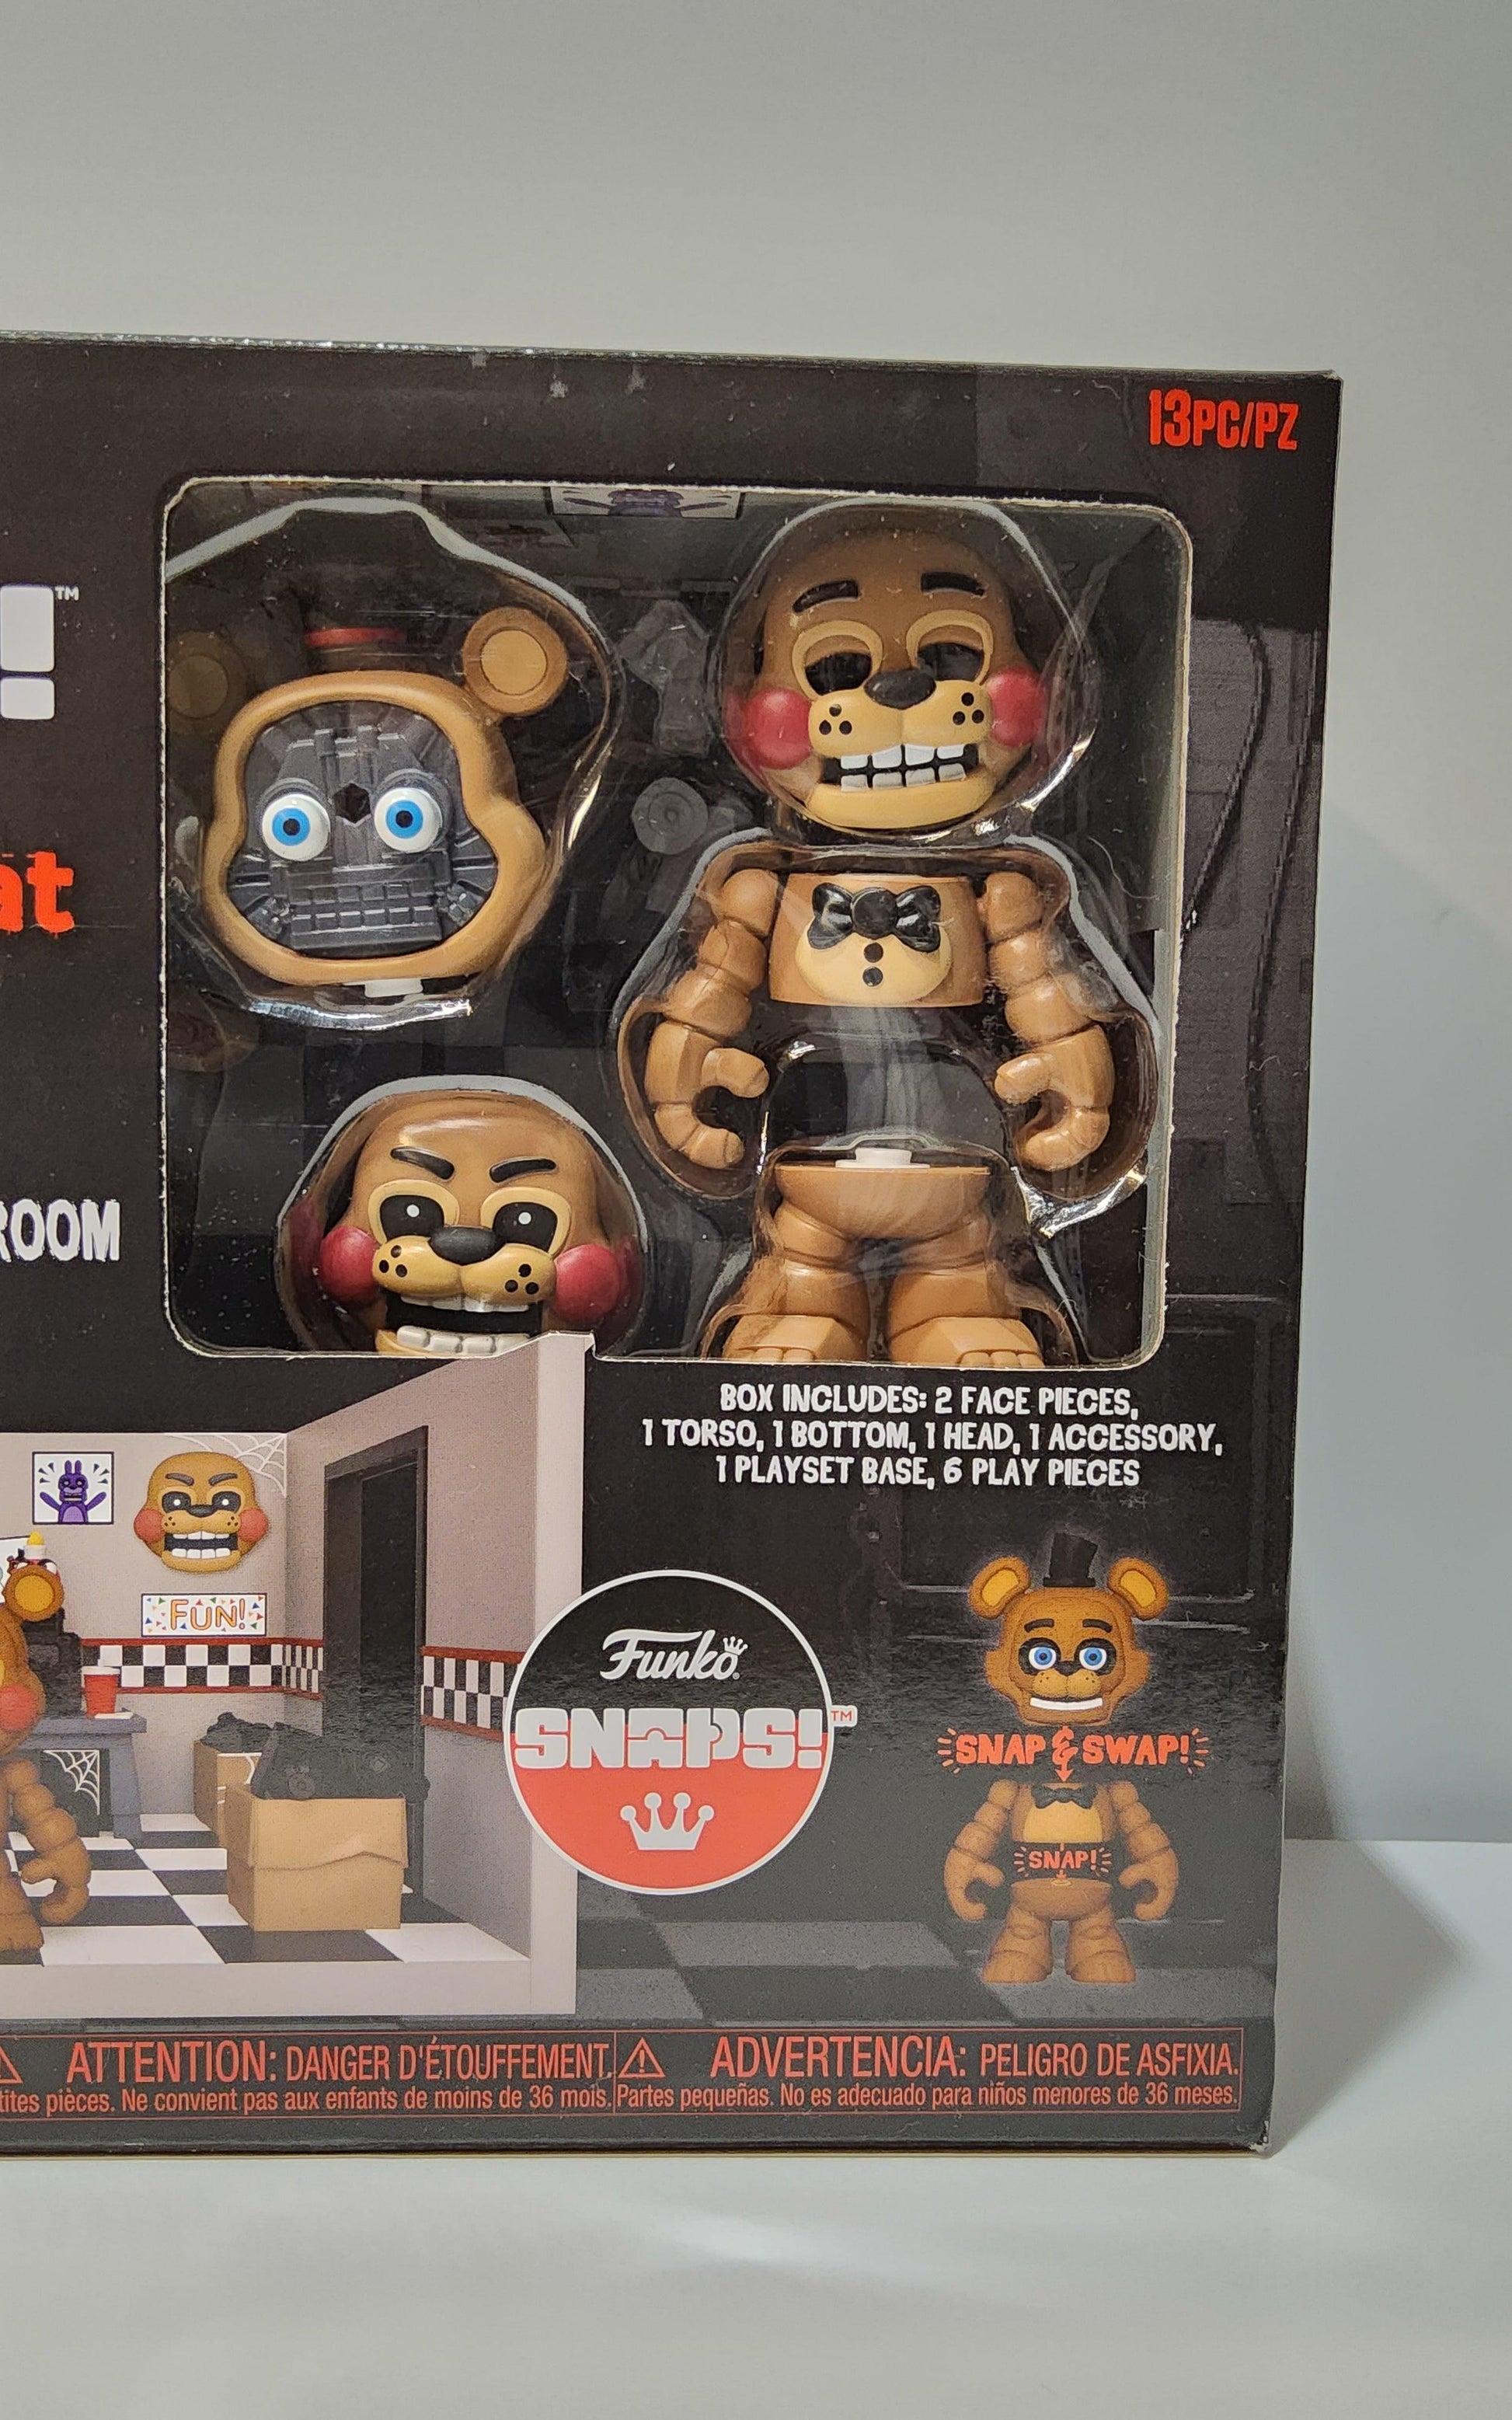 Five Nights at Freddy's SNAPS! Toy Freddy with Storage Room Playset